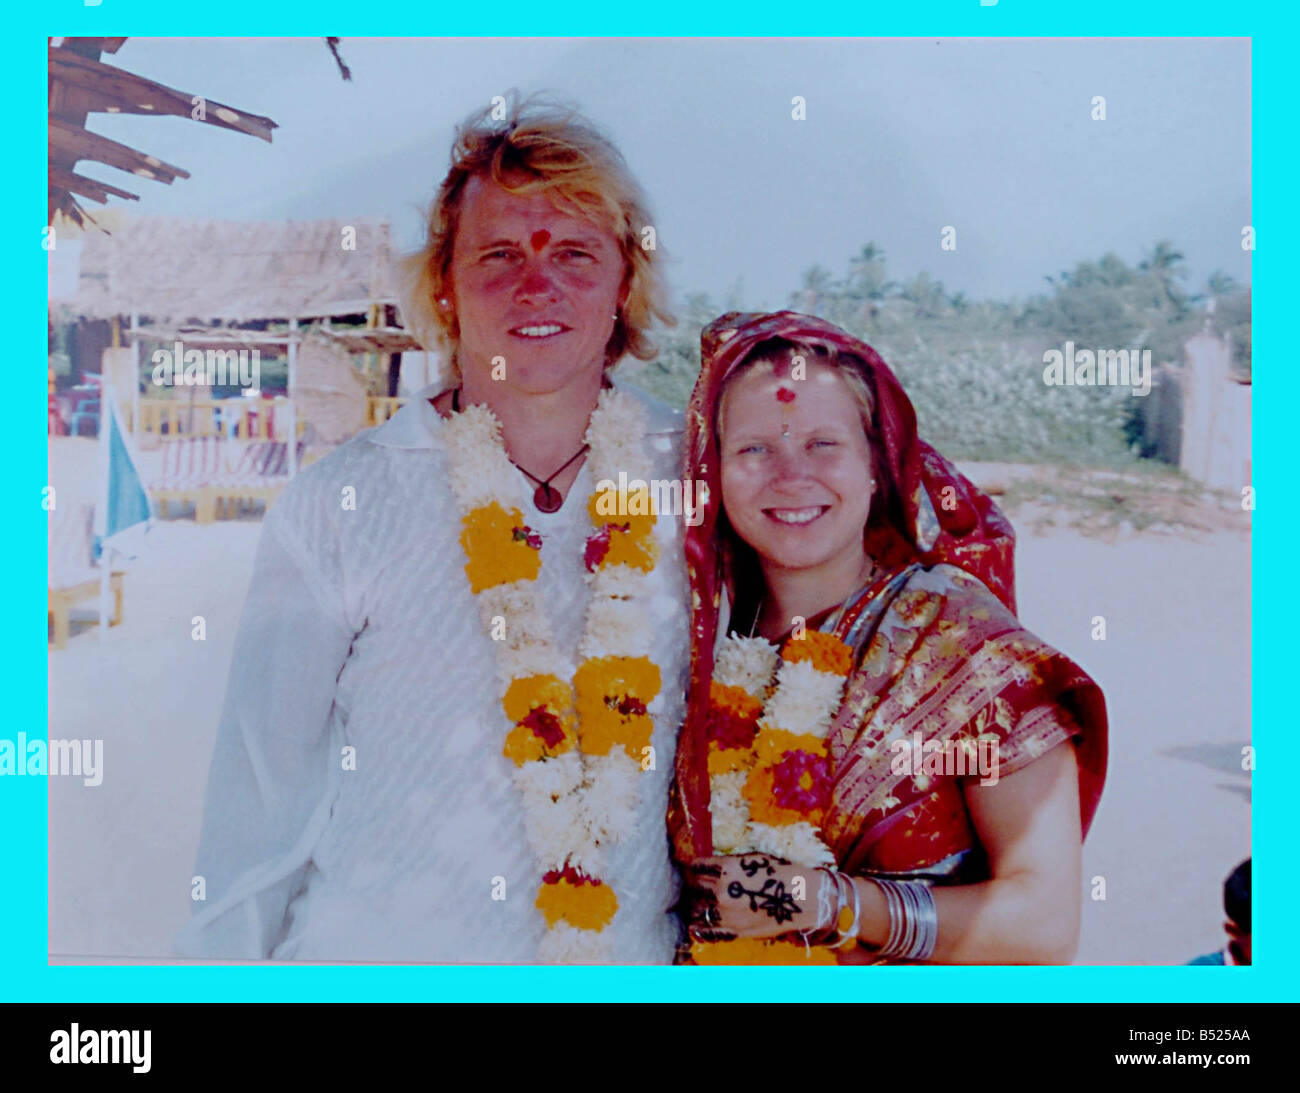 TONY 42 AND LARISA 22 CAPLIN HAVE MARRIED EACH OTHER 3 TIMES THEY MARRIED IN NOV 2005 COLLECTS OF THE SECOND WEDDING IN GOA INDIA A HINDU WEDDING 12 JAN 2006 Stock Photo